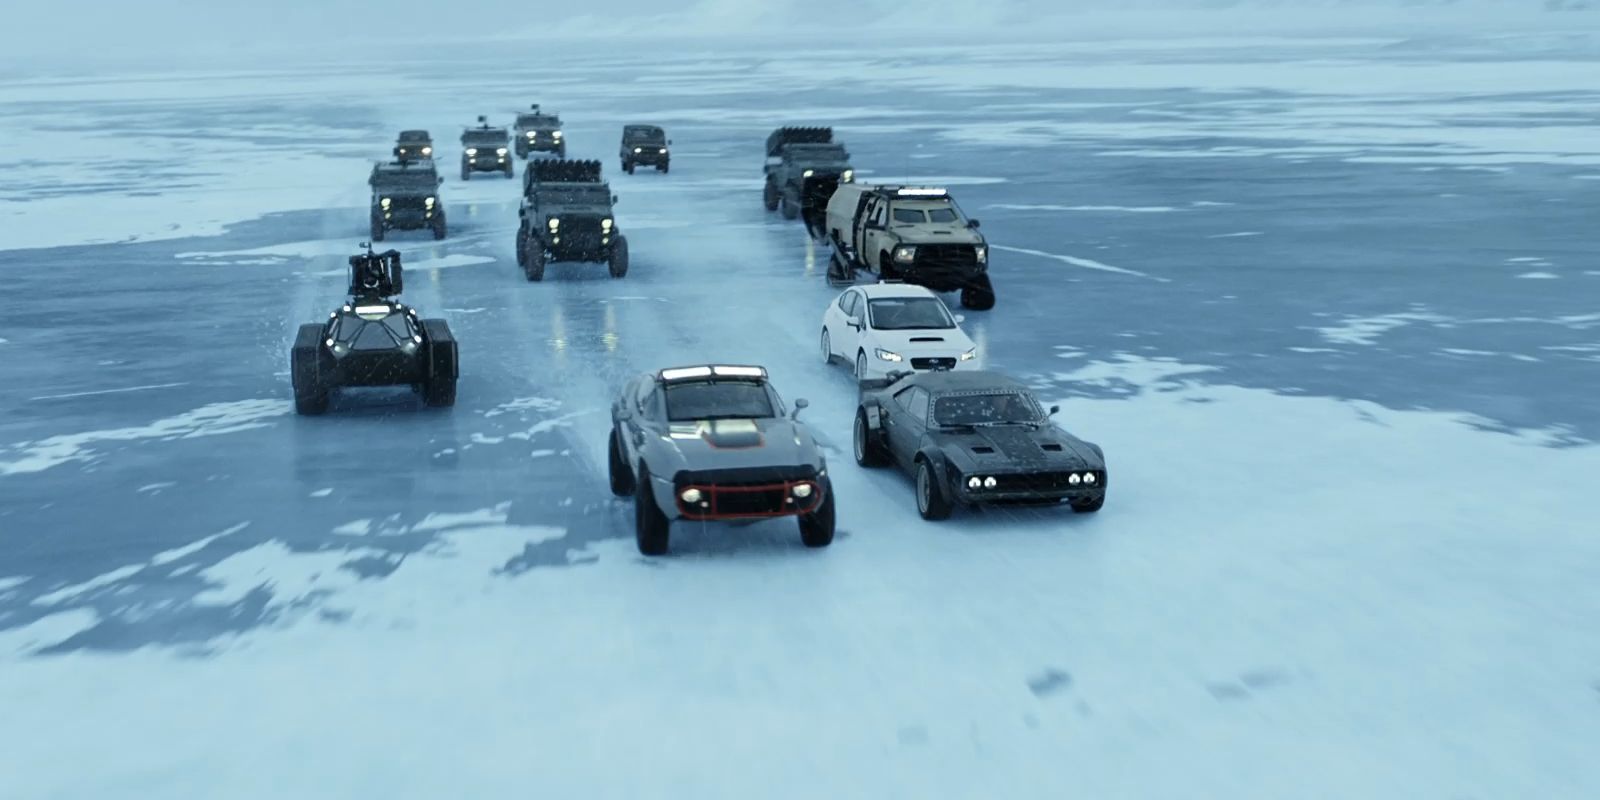 Dom's crew dodges attacks from Cipher's men in Russia in Fate Of The Furious